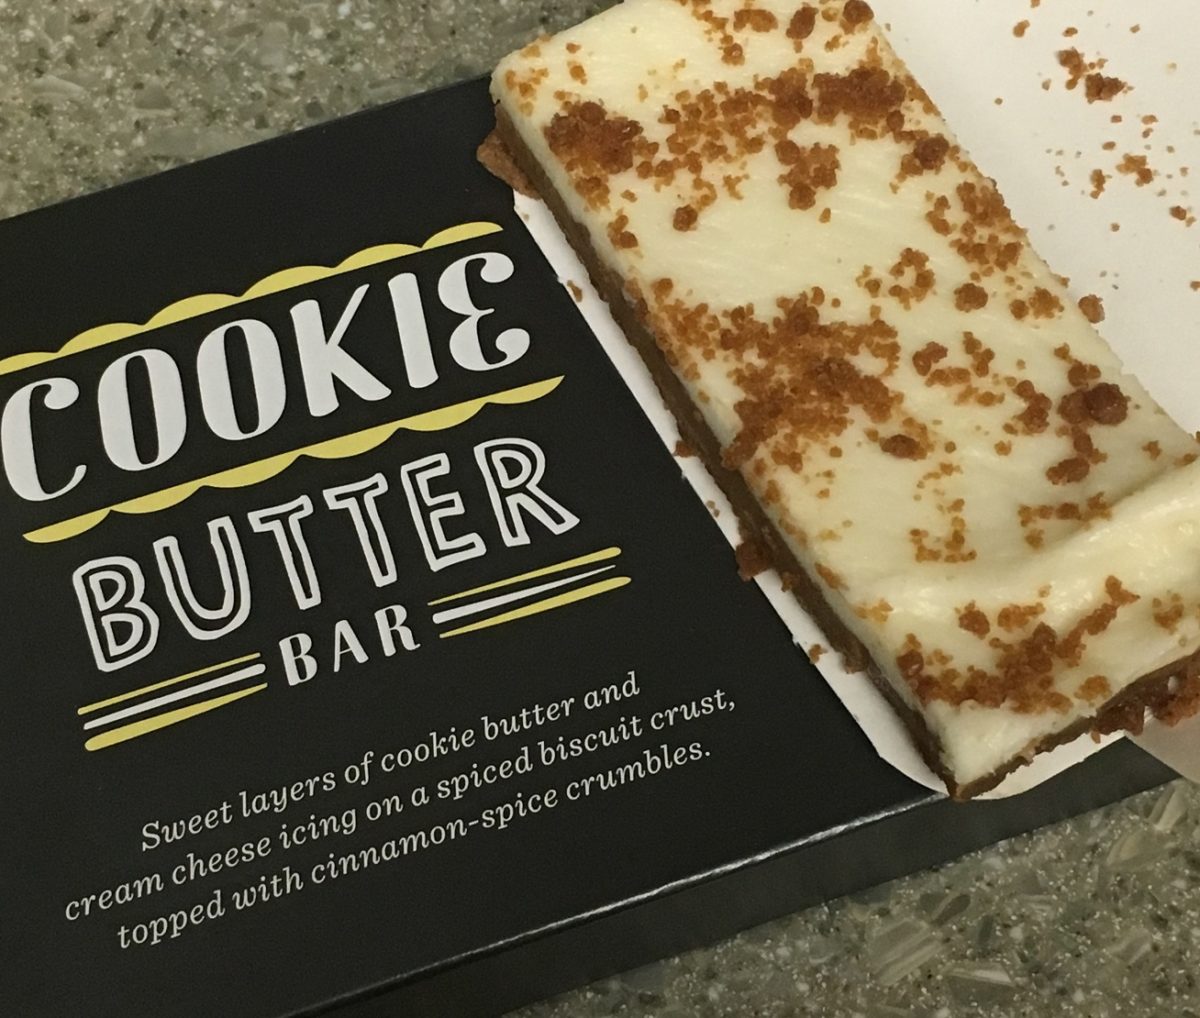 The Cookie Butter Bar at Starbucks